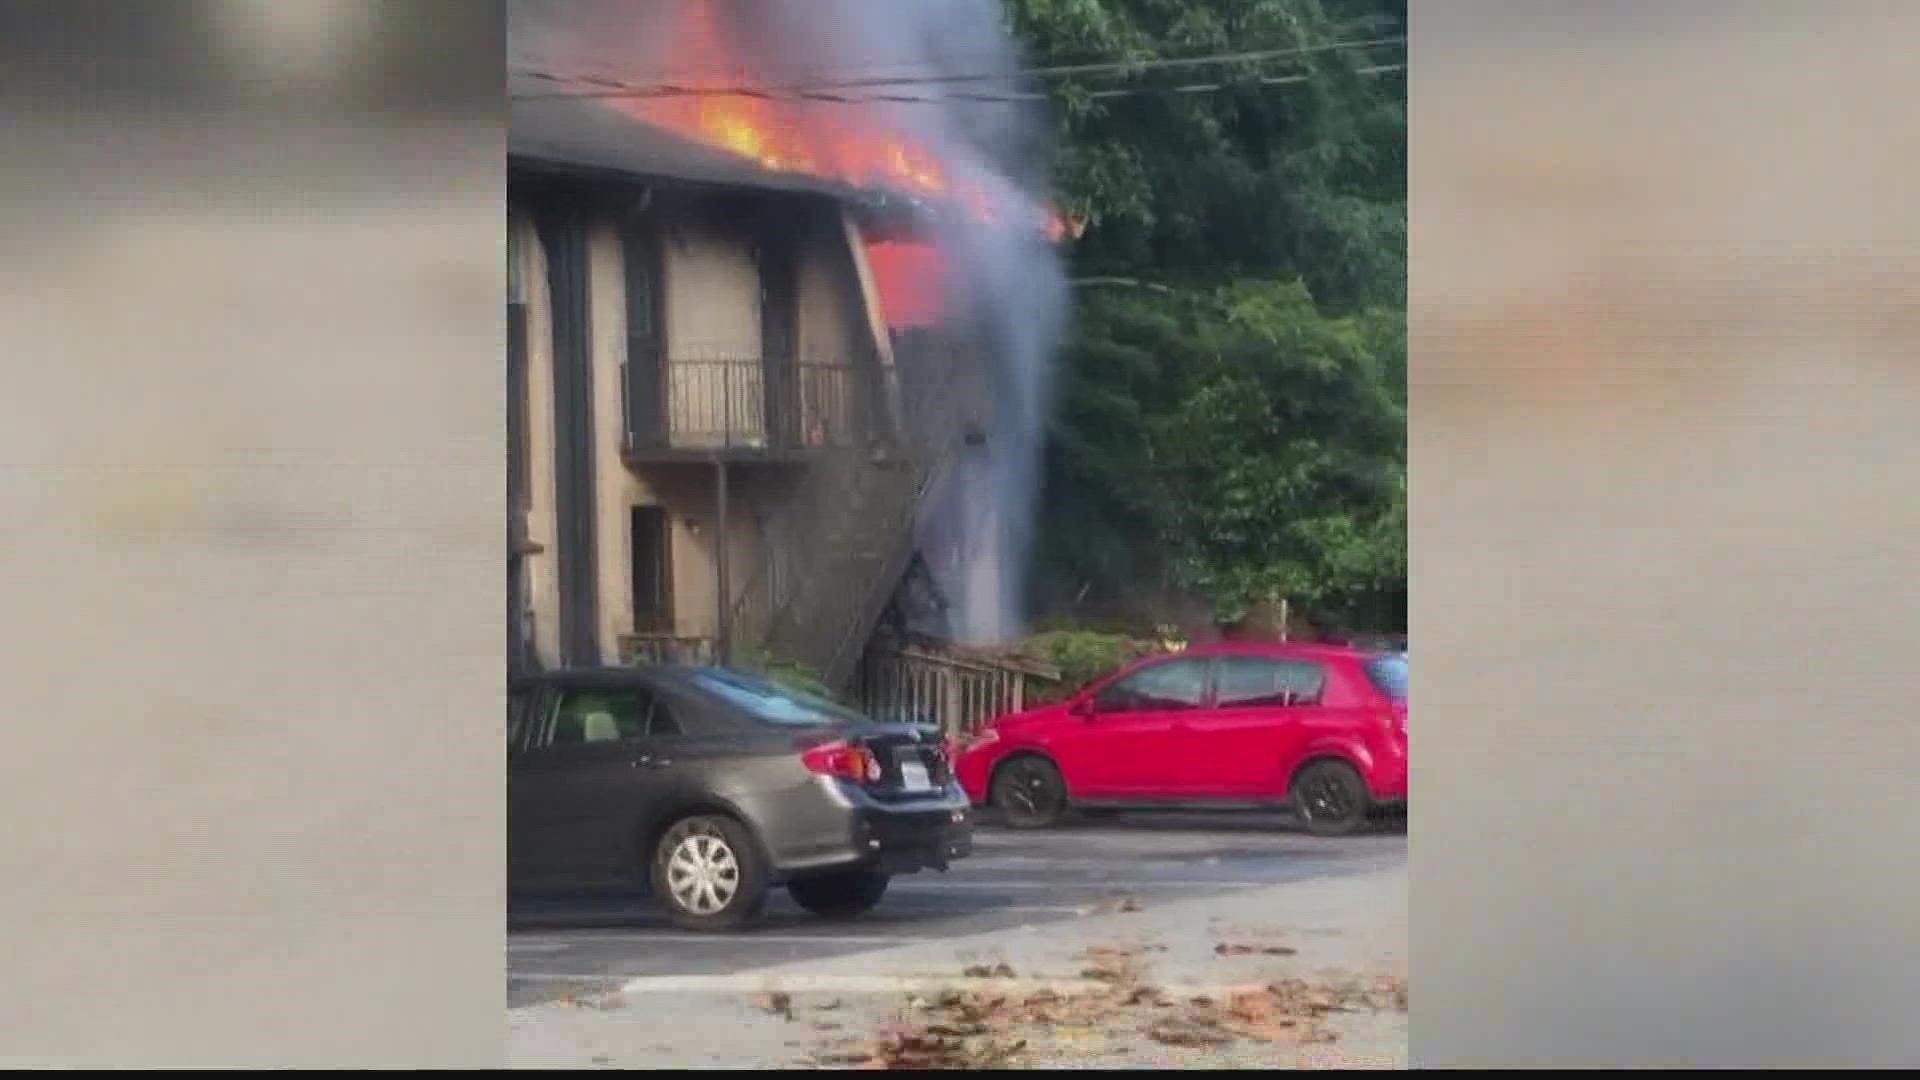 Officials are now calling an apartment fire in Atlanta arson. No arrests have been made but police said they have a person of interest.